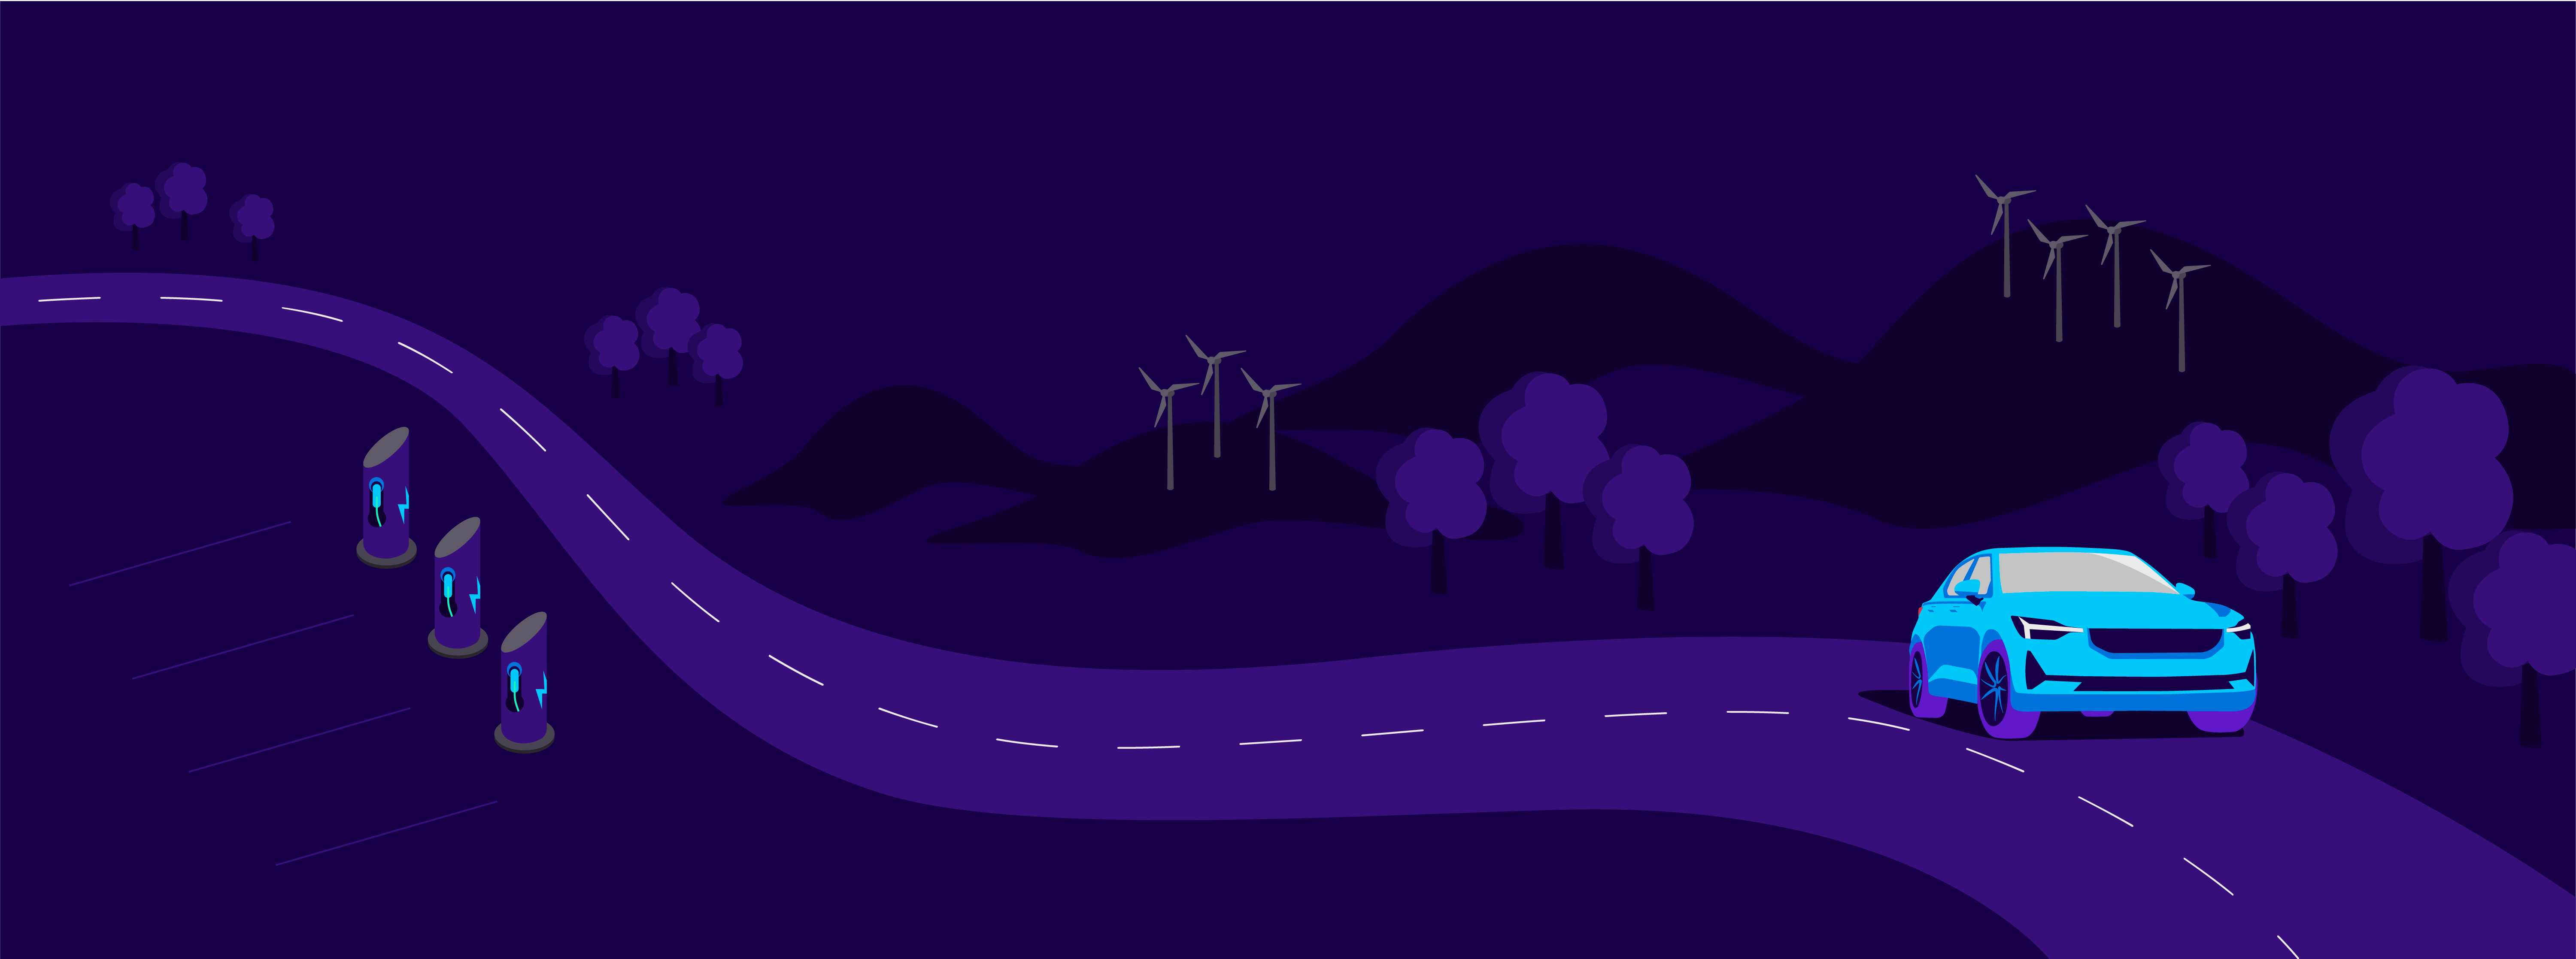 Dark purple background with a light blue car driving on a road past electrical vehicle chargers and wind turbines